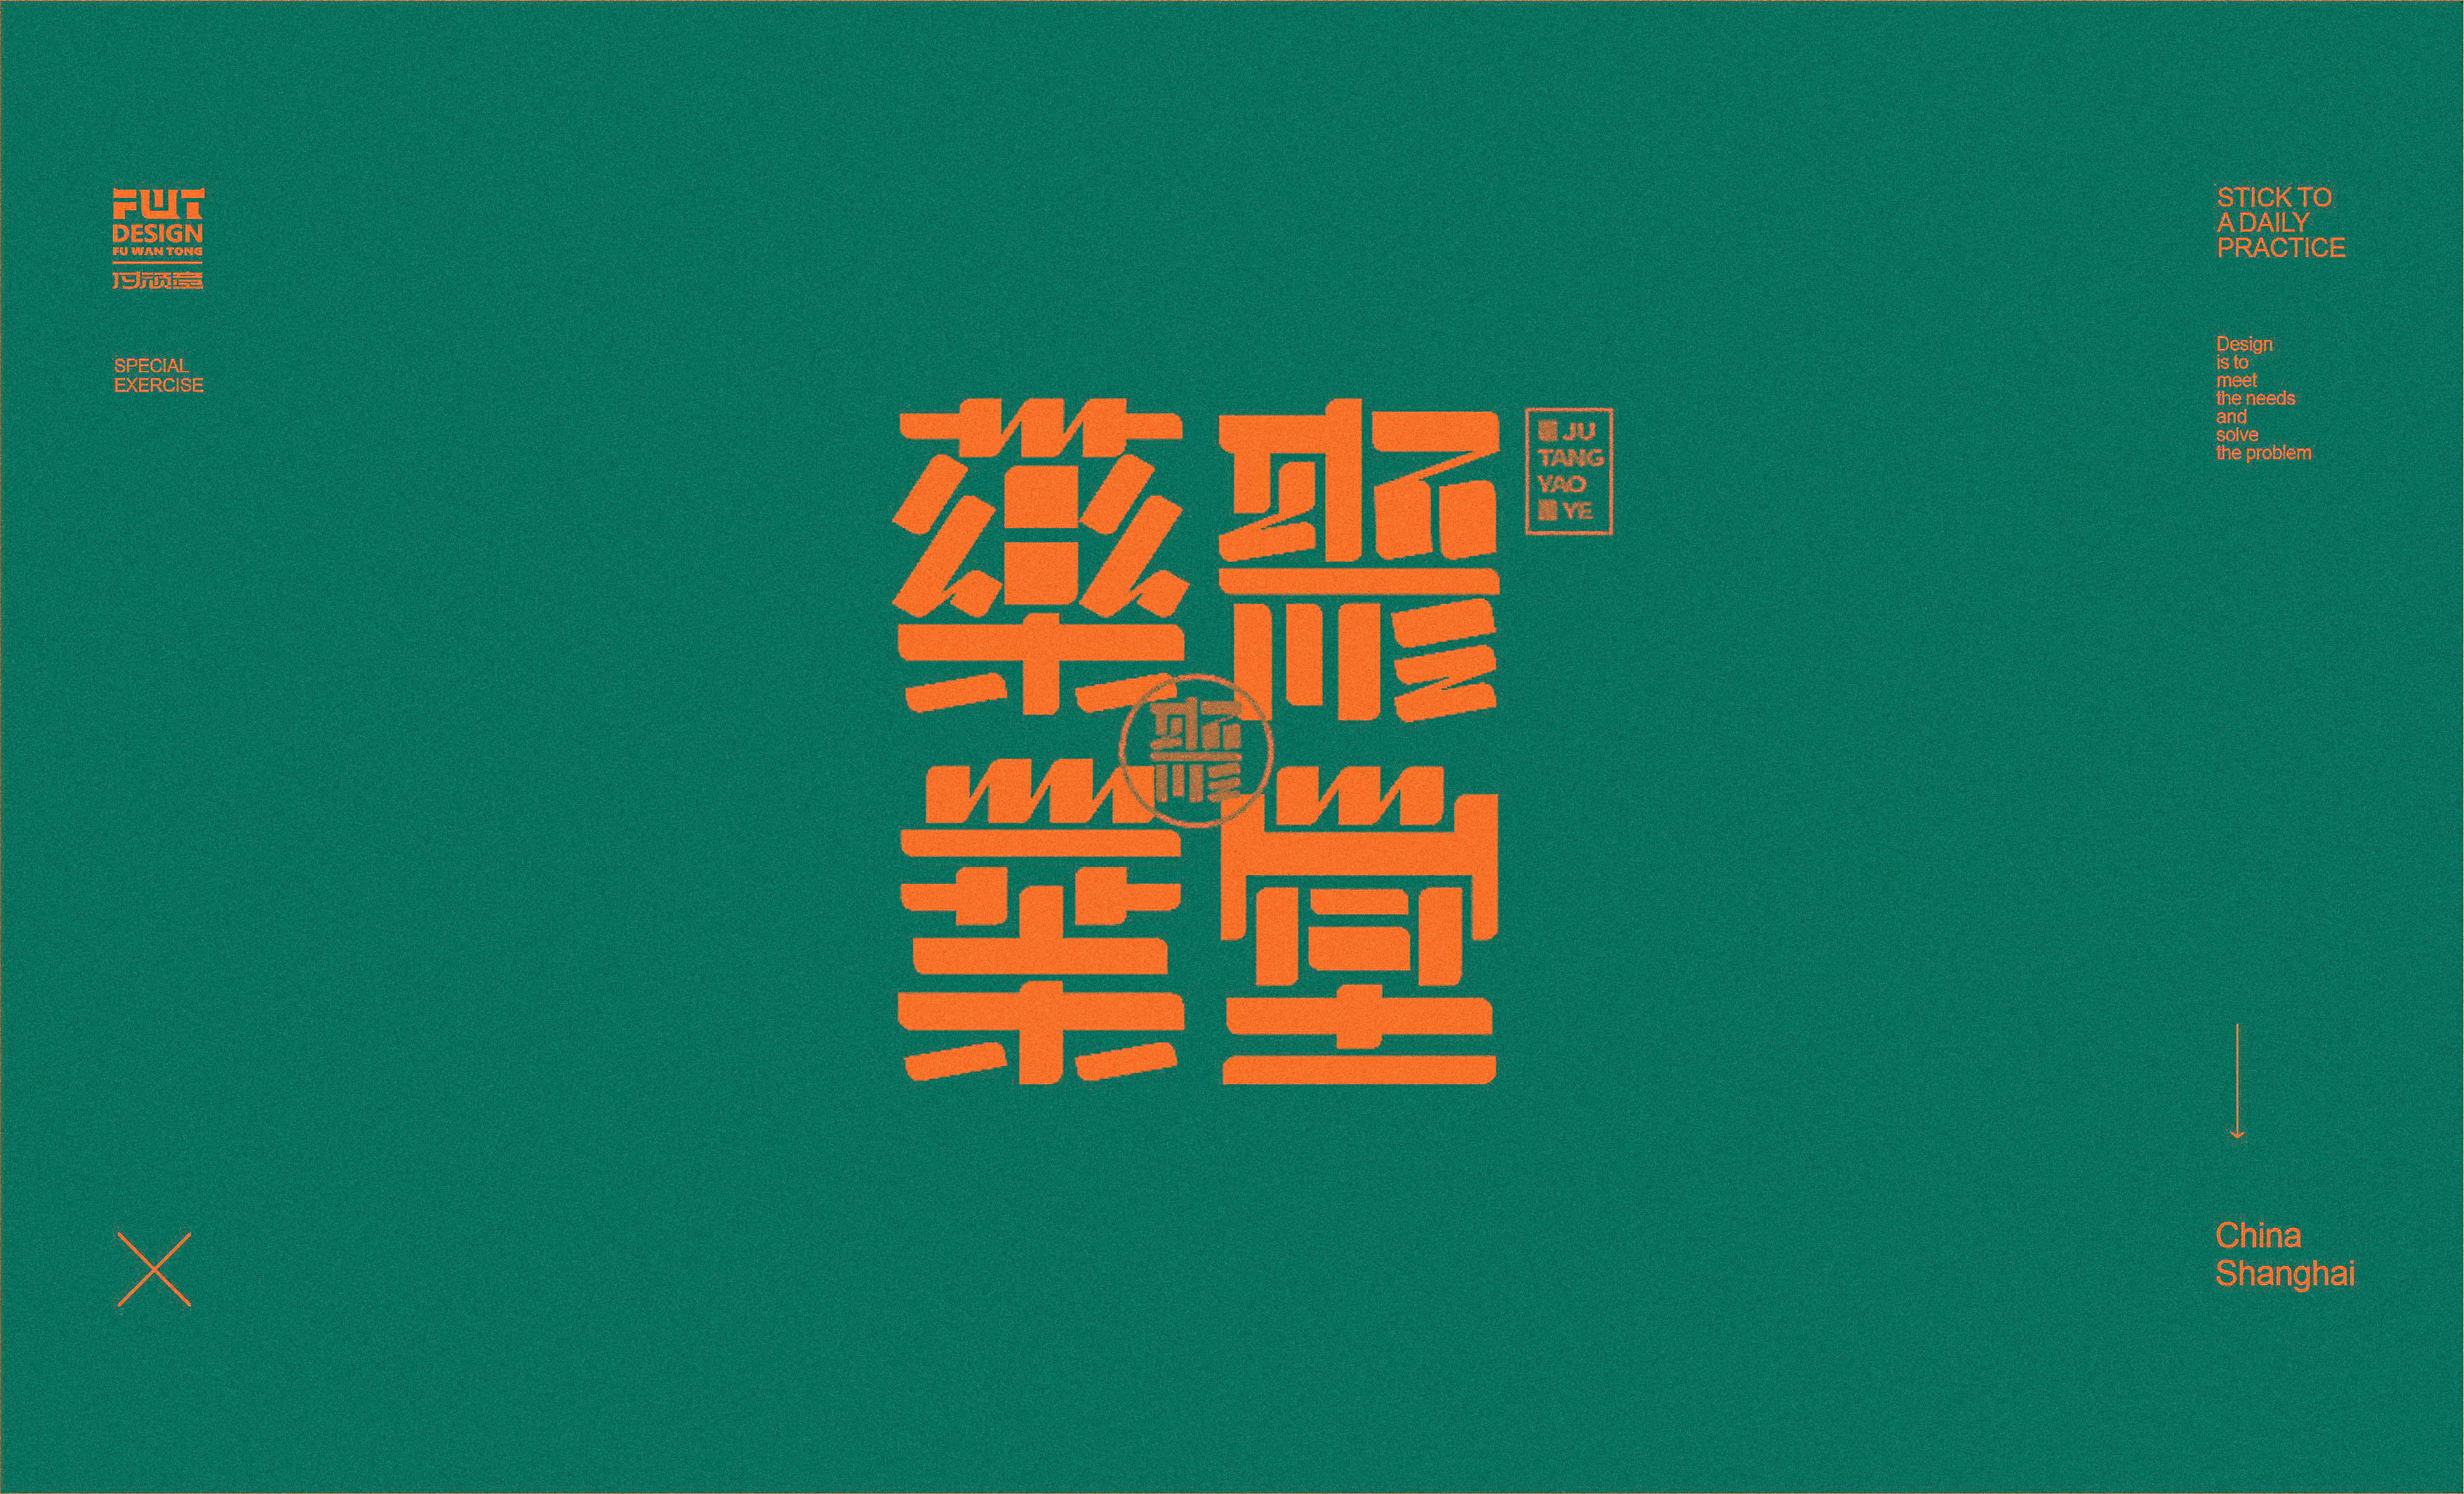 20P Collection of the latest Chinese font design schemes in 2021 #.327